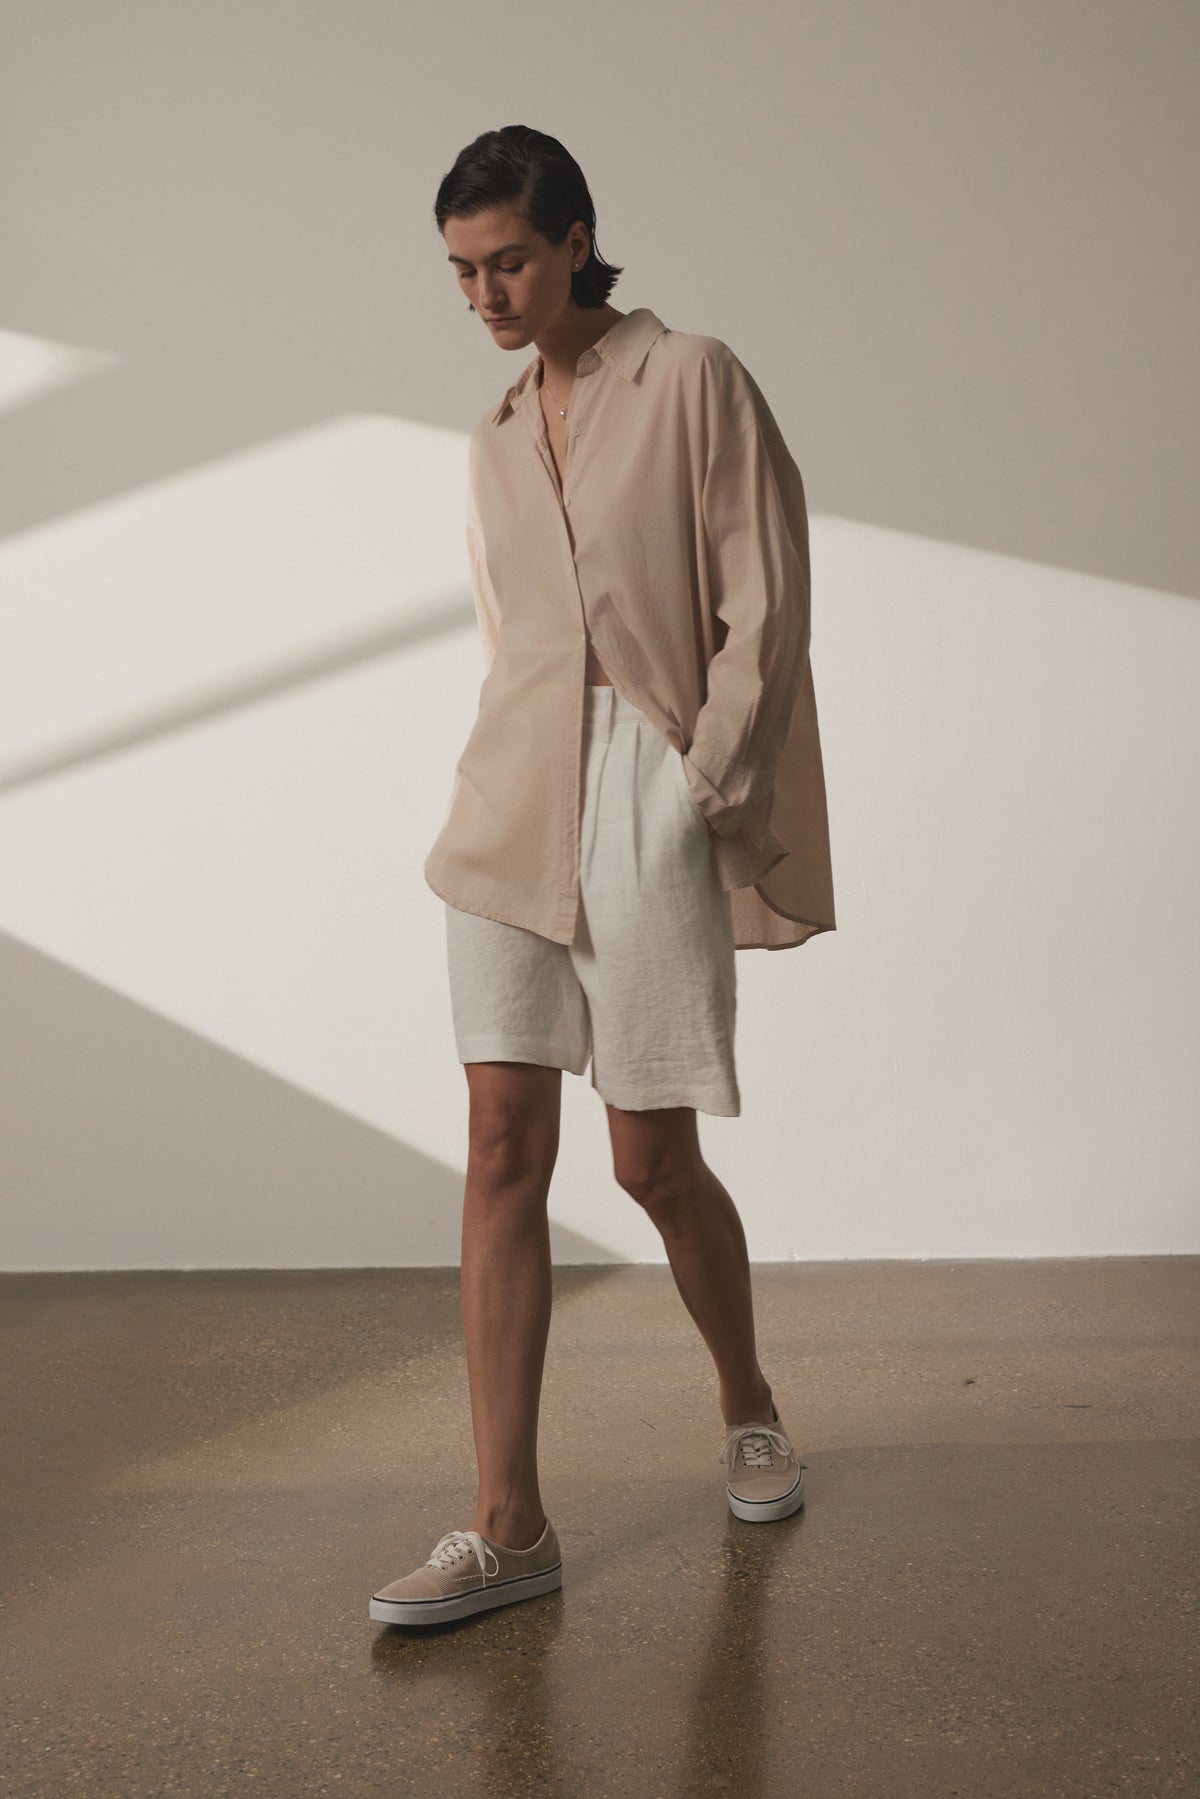 A person stands indoors, wearing an oversized Velvet by Jenny Graham REDONDO button-up shirt, white shorts, and tan sneakers, looking down thoughtfully in a sunlit room with shadows on the wall.-36863309185217